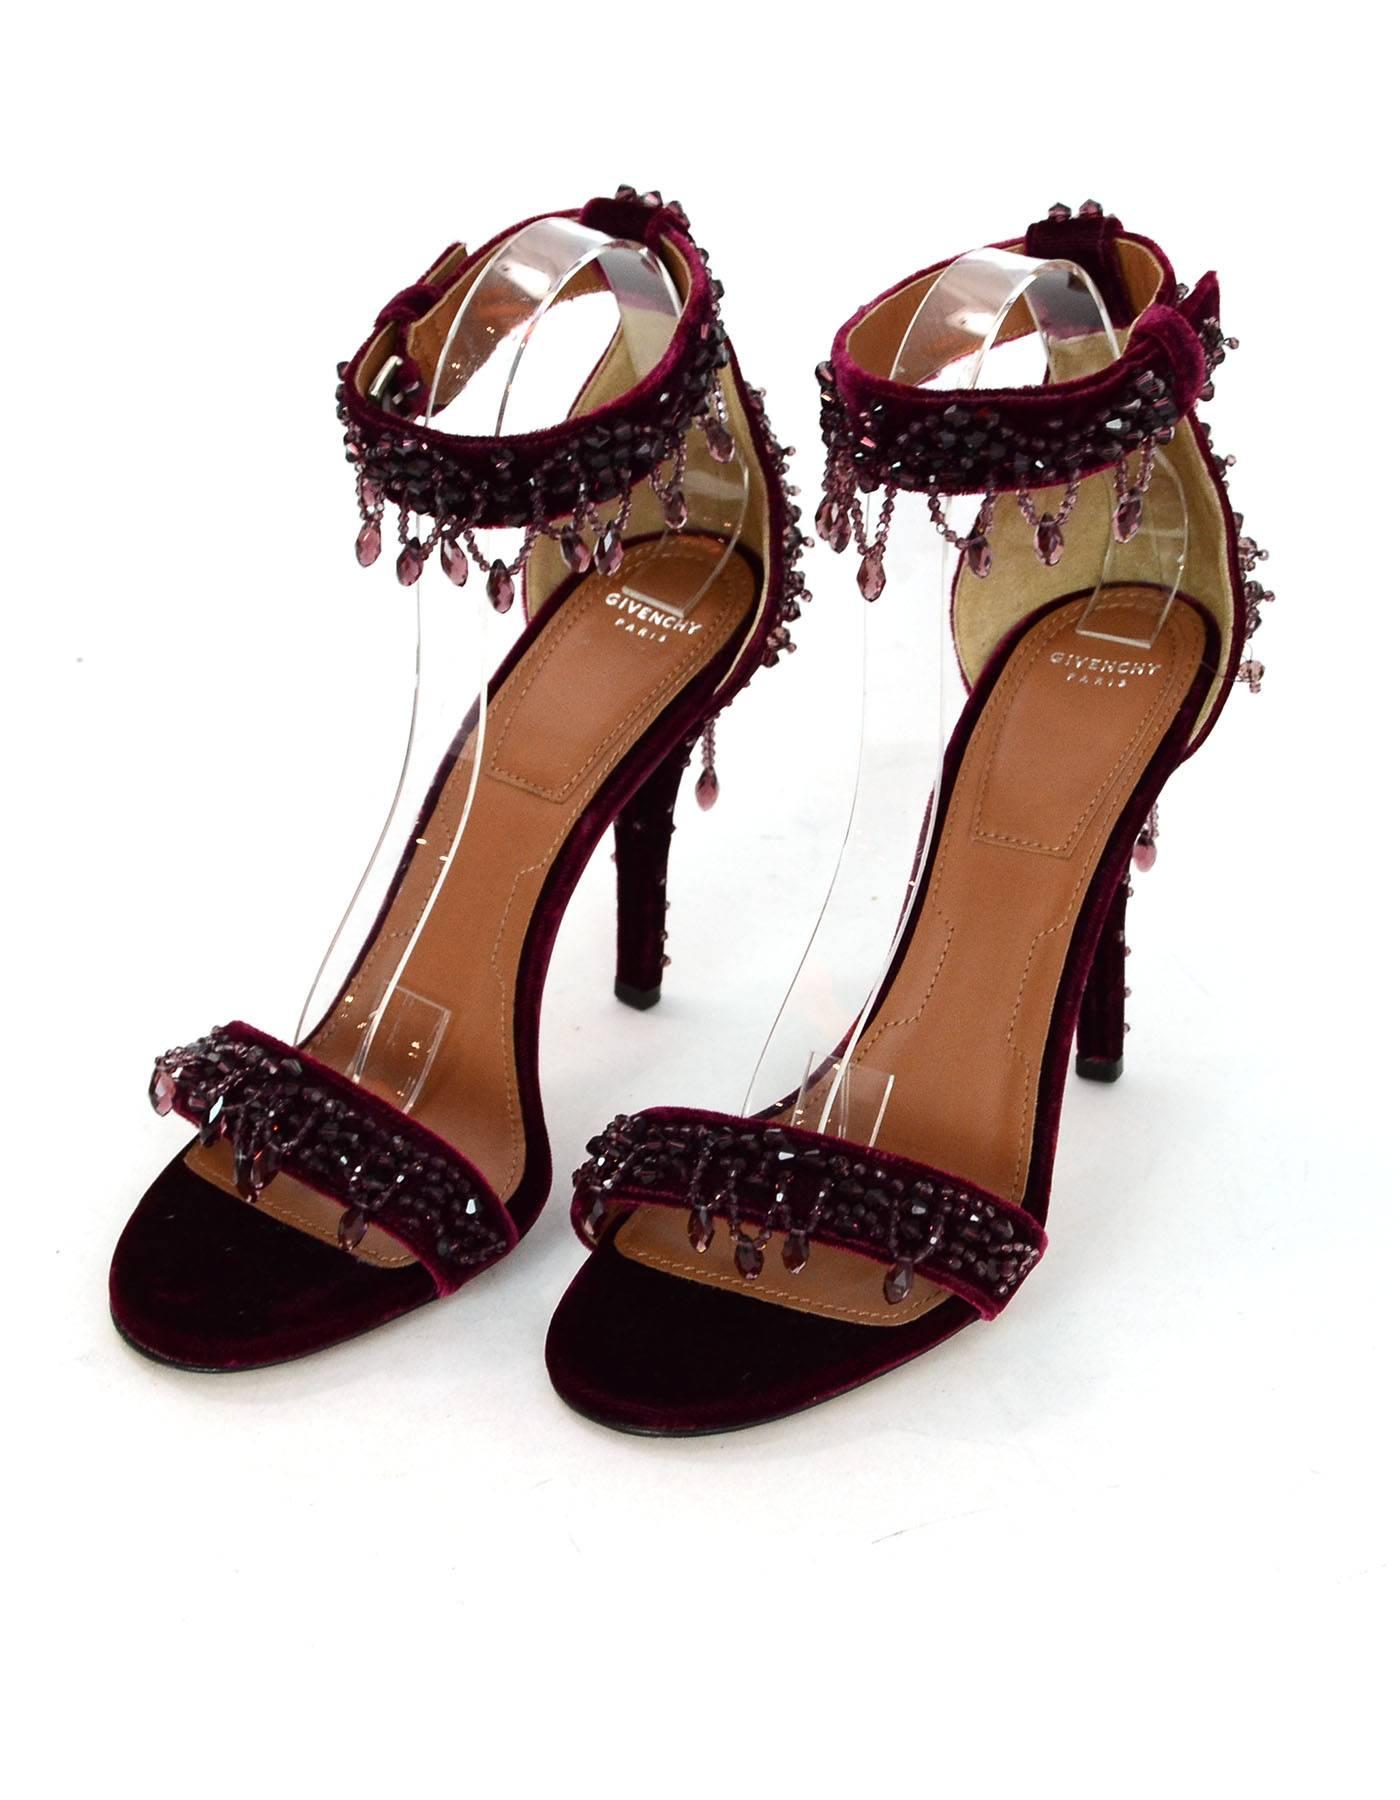 Givenchy Burgundy Velvet Beaded Infinity Sandals Sz 39 NEW

Made In: Italy
Color: Burgundy
Materials: Velvet, beads
Closure/Opening: Buckle closure at ankle strap
Sole Stamp: Givenchy 39 made in italy
Overall Condition: Excellent pre-owned condition